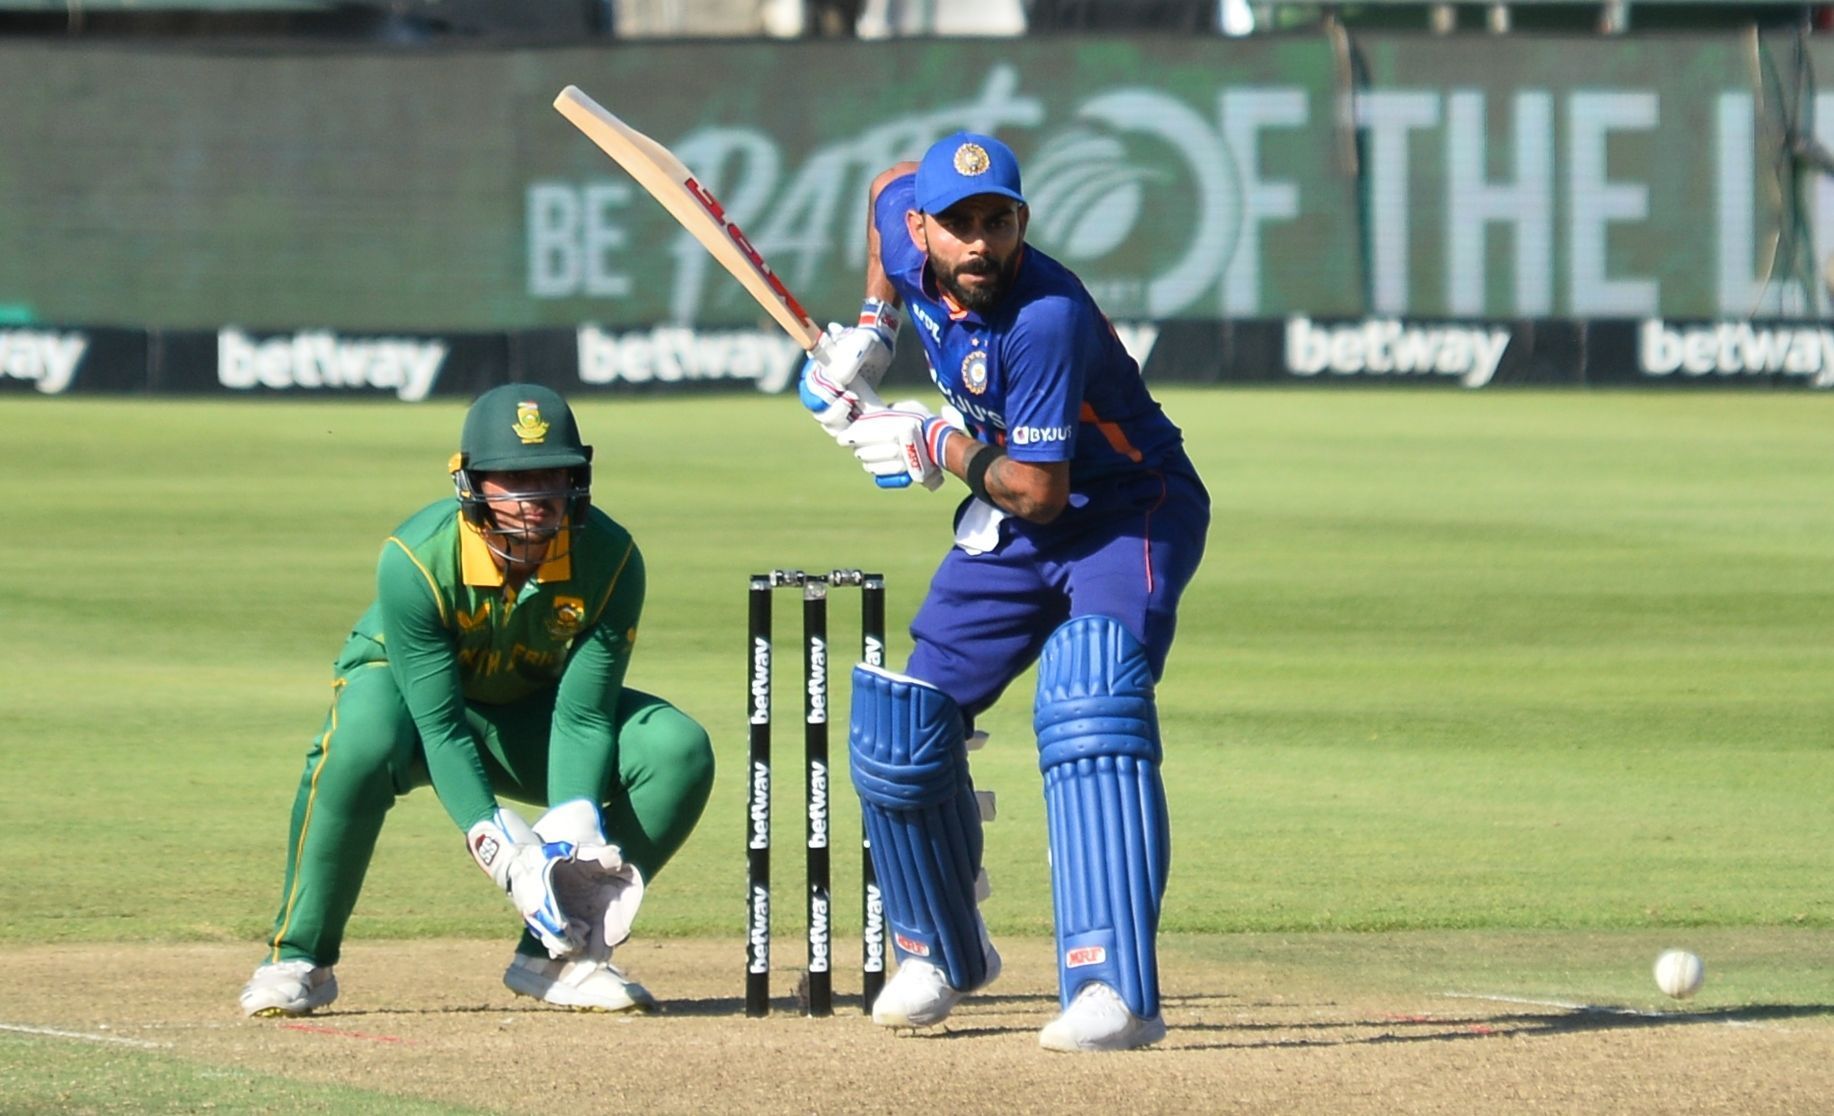 Virat Kohli was slightly circumspect in his approach during the ODI series against South Africa